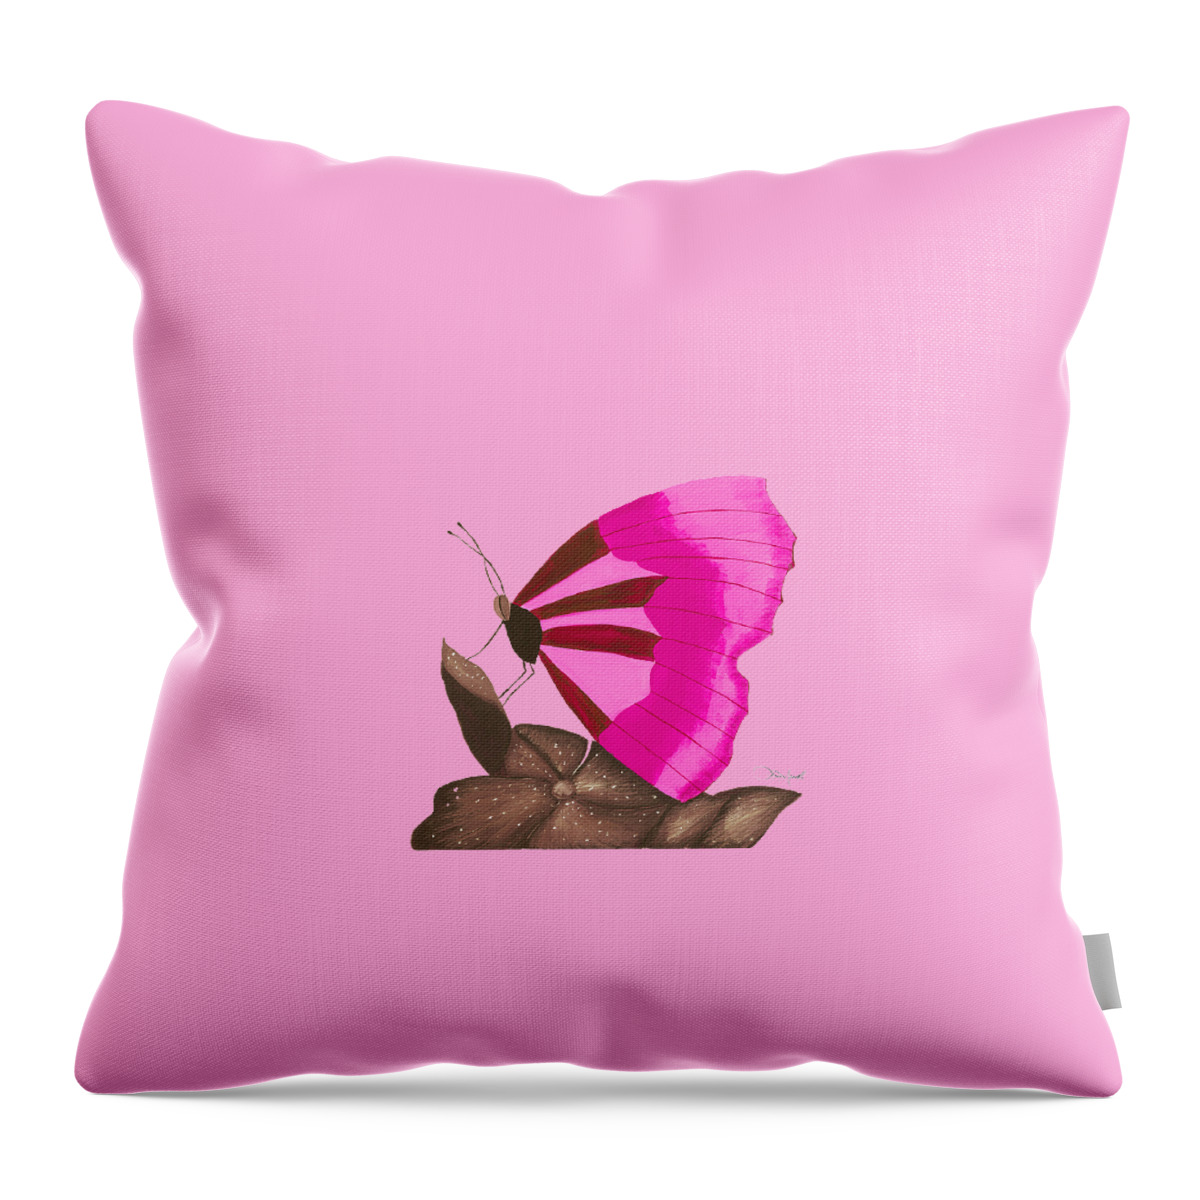 Watercolor Throw Pillow featuring the painting Pink Butterfly by Lisa Senette